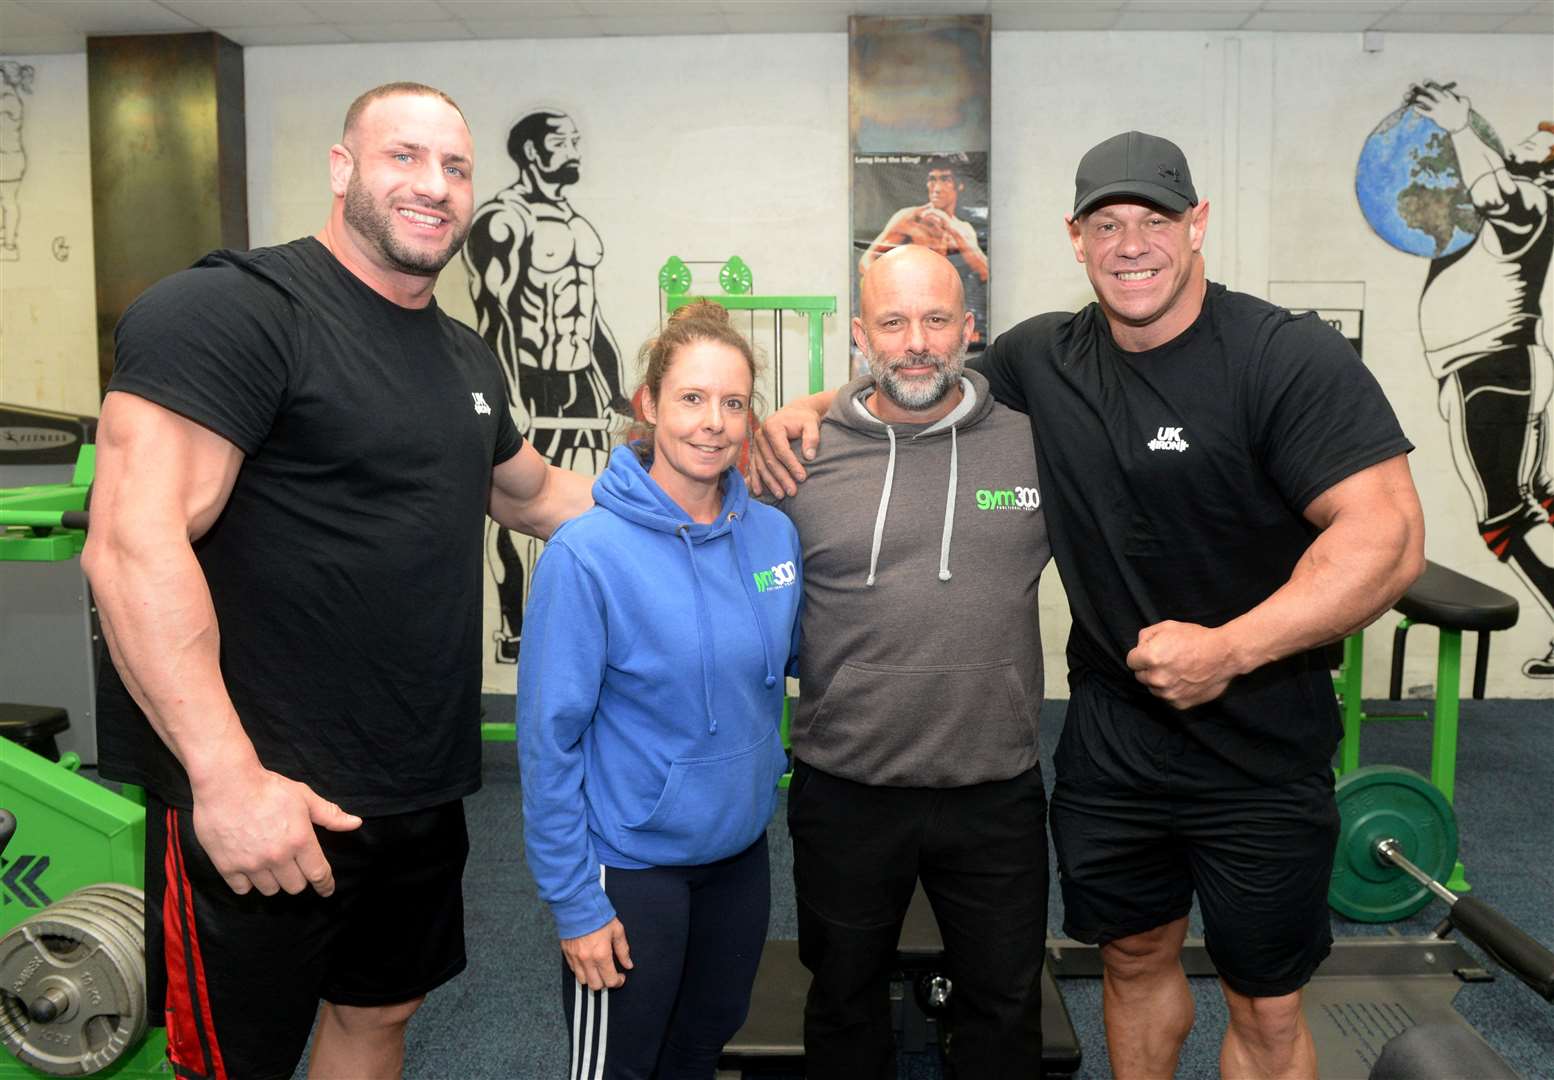 Body builders Ace Roscoe Sanchez and Paul Thomson with Gym300 owners Nicola and Tom Ashmole.